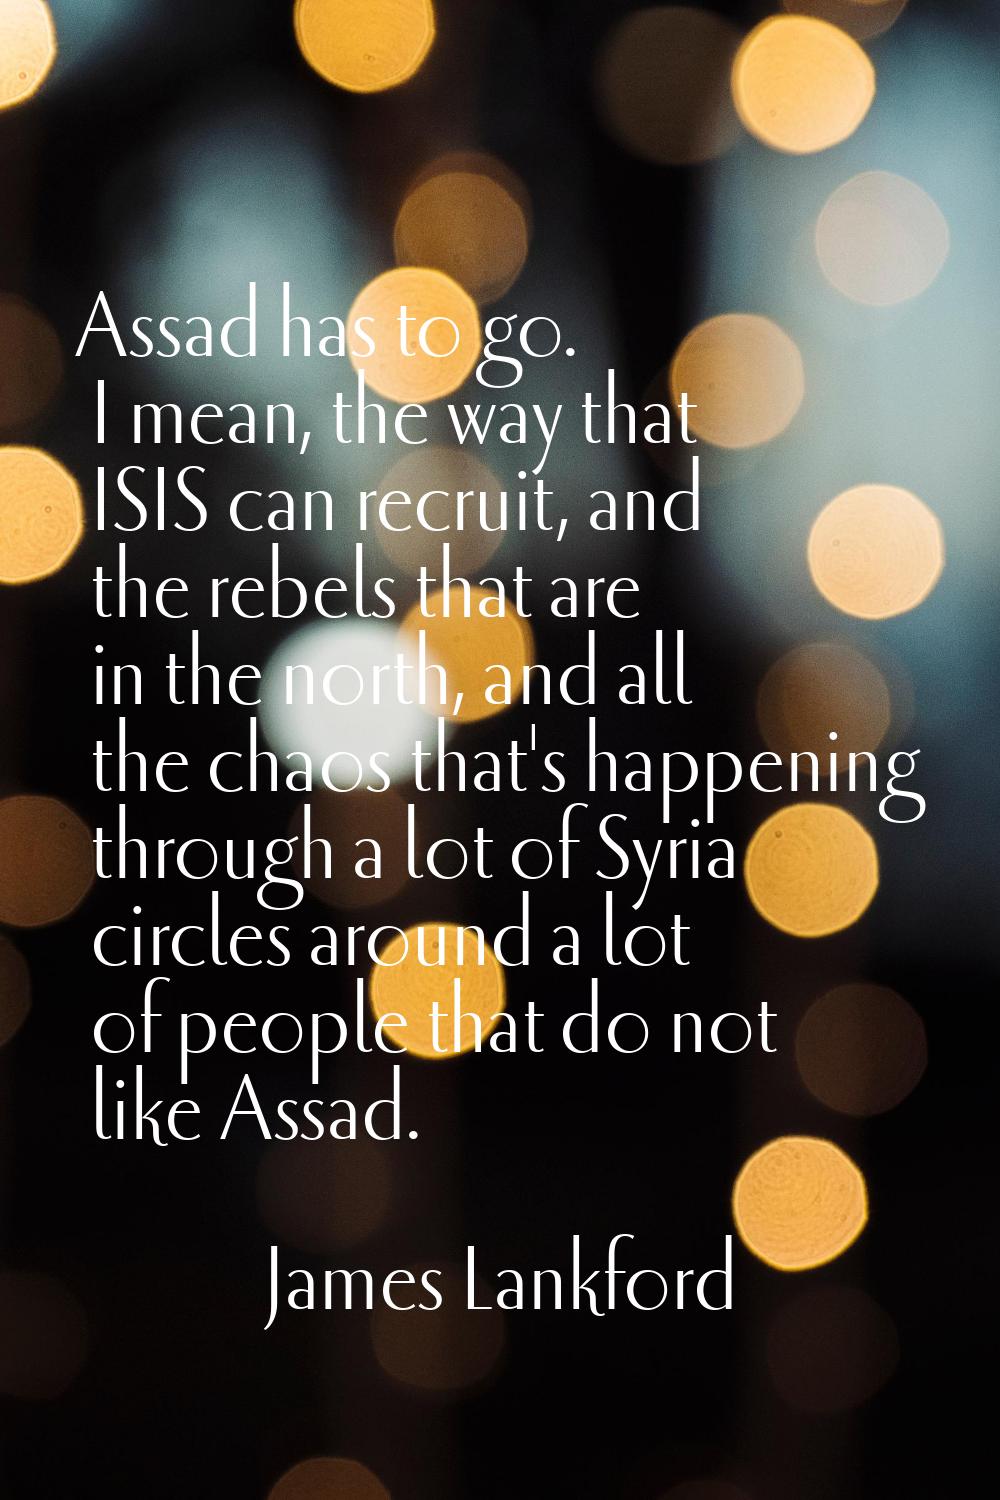 Assad has to go. I mean, the way that ISIS can recruit, and the rebels that are in the north, and a